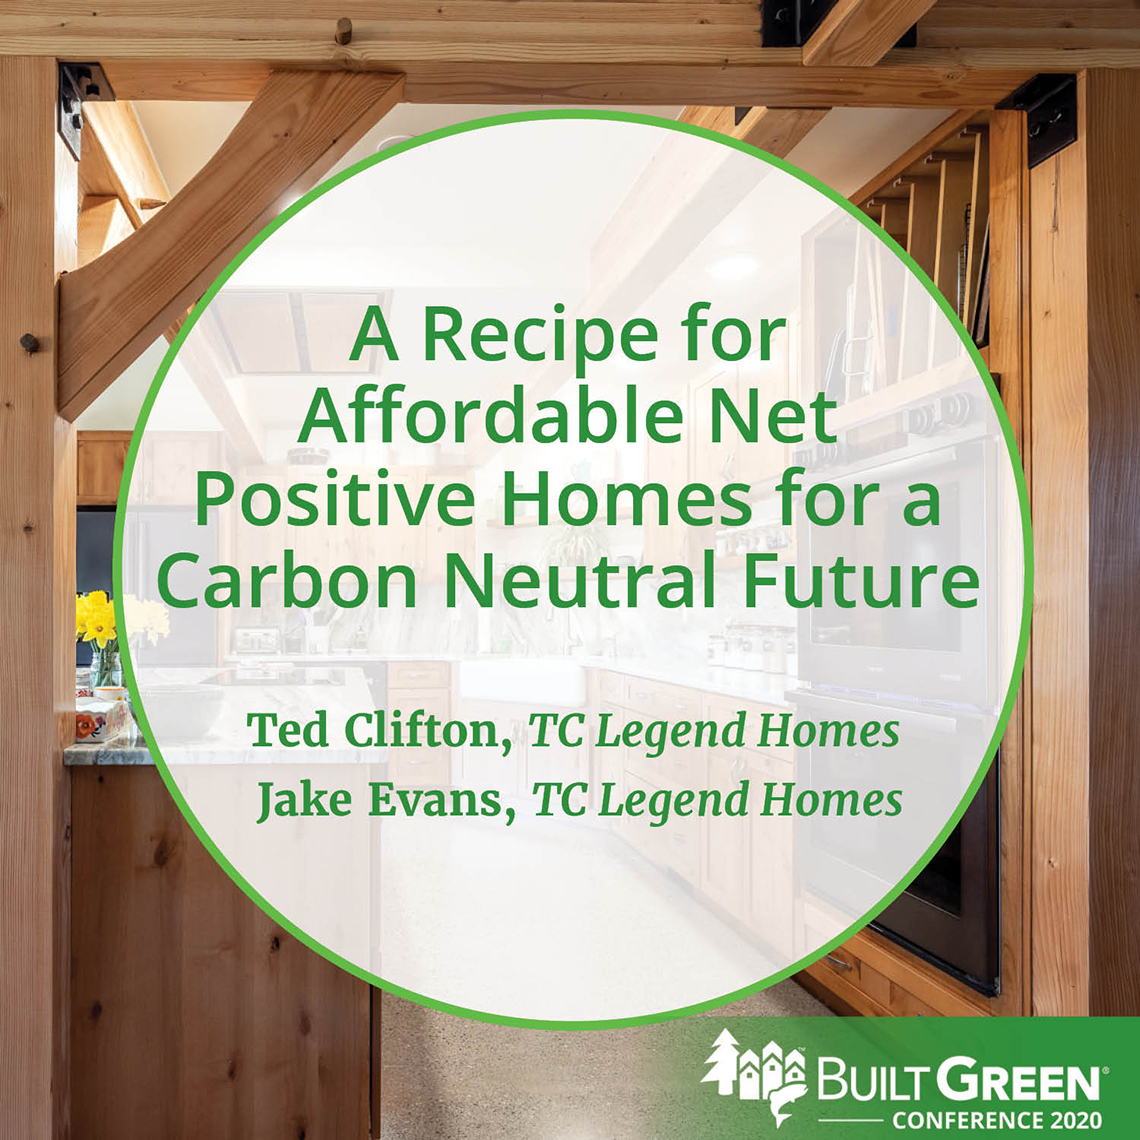 Built Green Conference Session: A Recipe for Affordable Net Positive Homes for a Carbon Neutral Future, featuring Ted Clifton and Jake Evans, TC Legend Homes